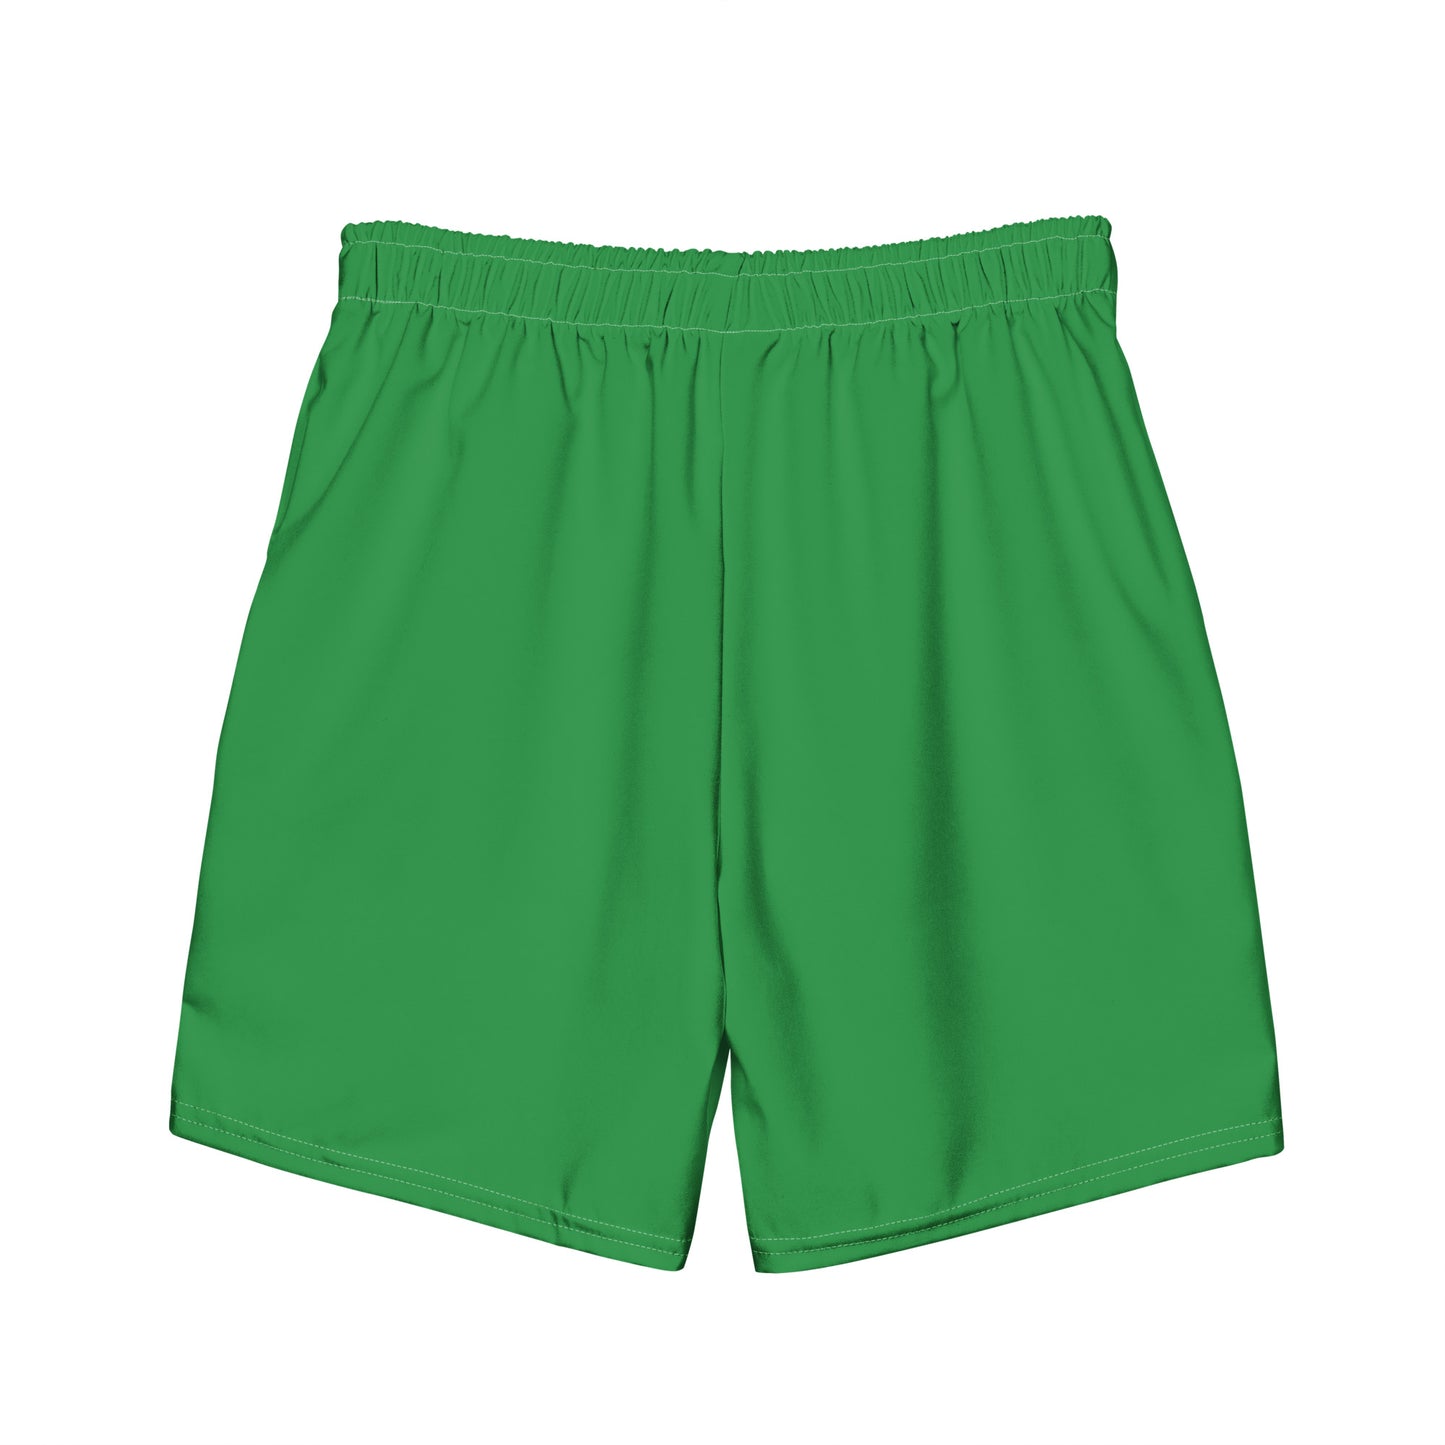 All-Over Print Recycled Swim Shorts: Sea Green